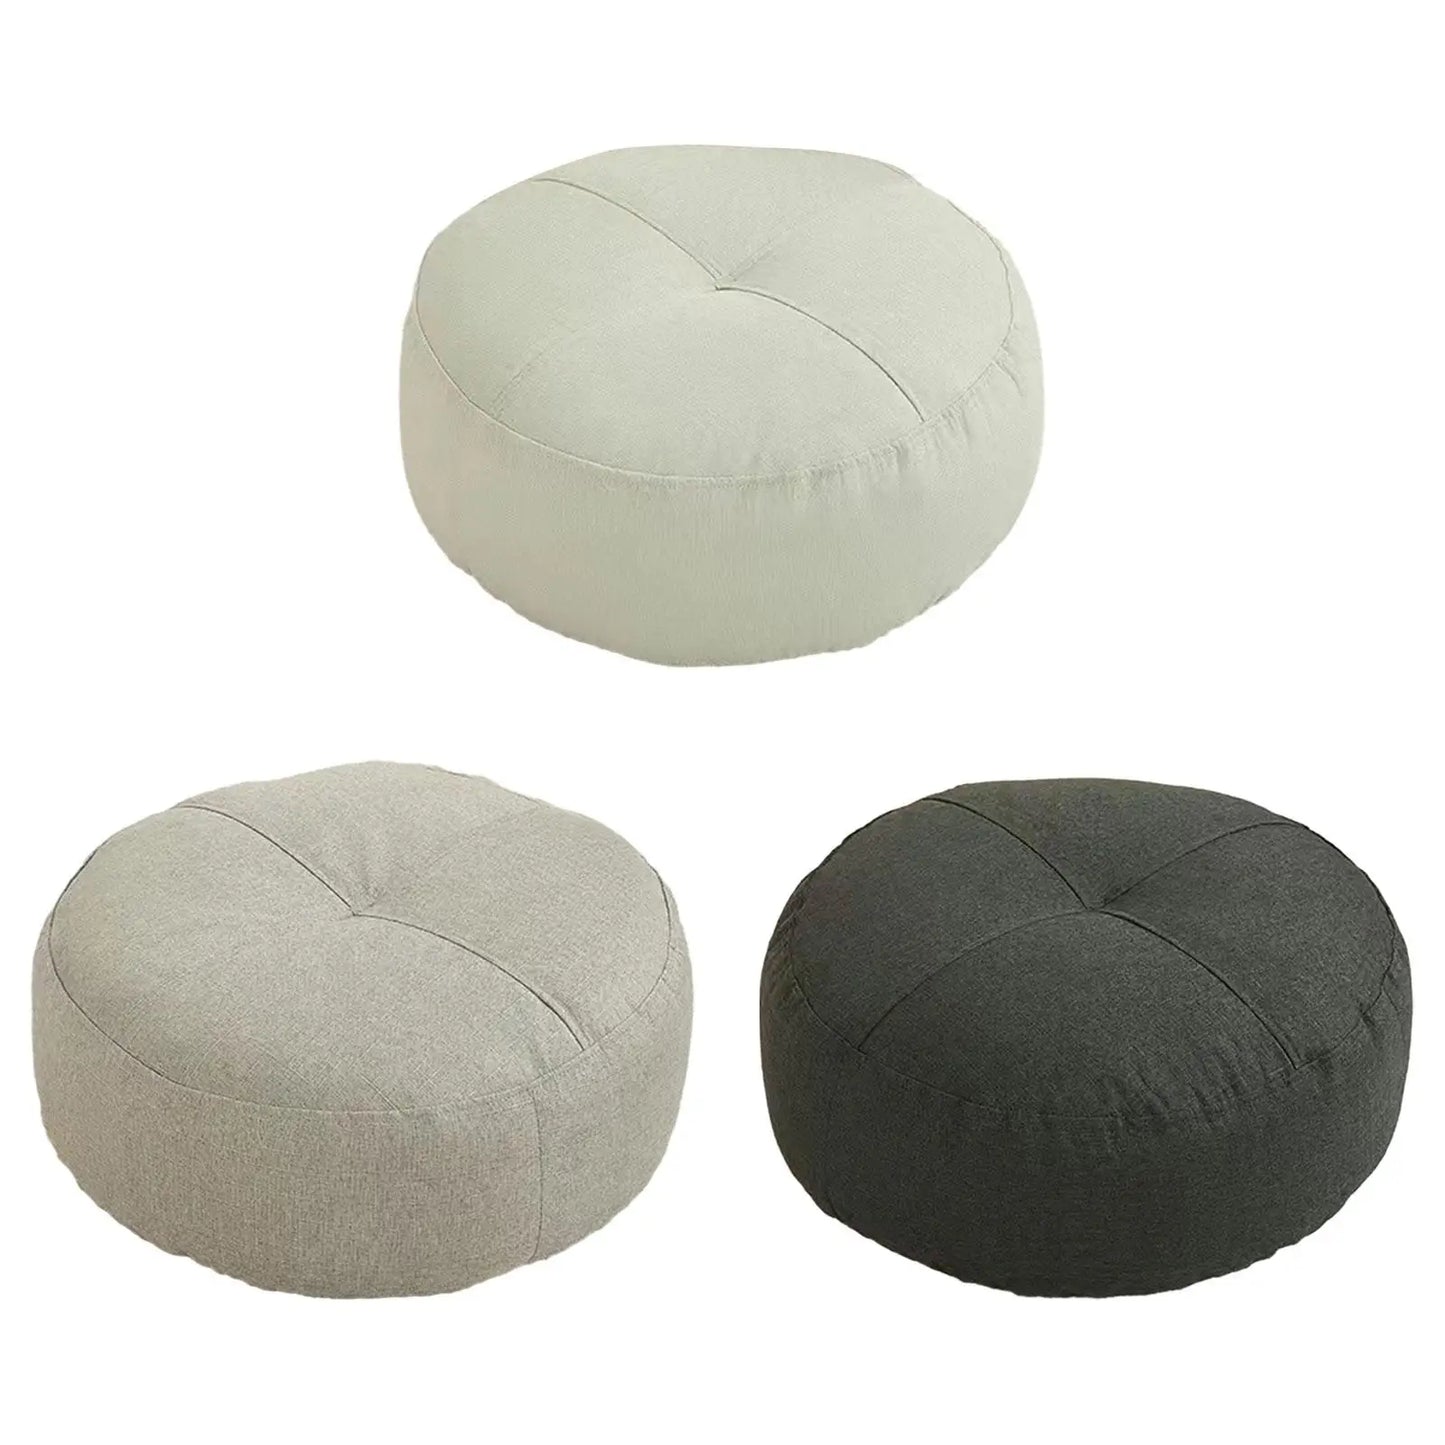 Round Floor Pillow Small Multifunctional Meditation Cushion for Floor Seating Chair Sofa Yoga Adults Kids Bedroom Living Room